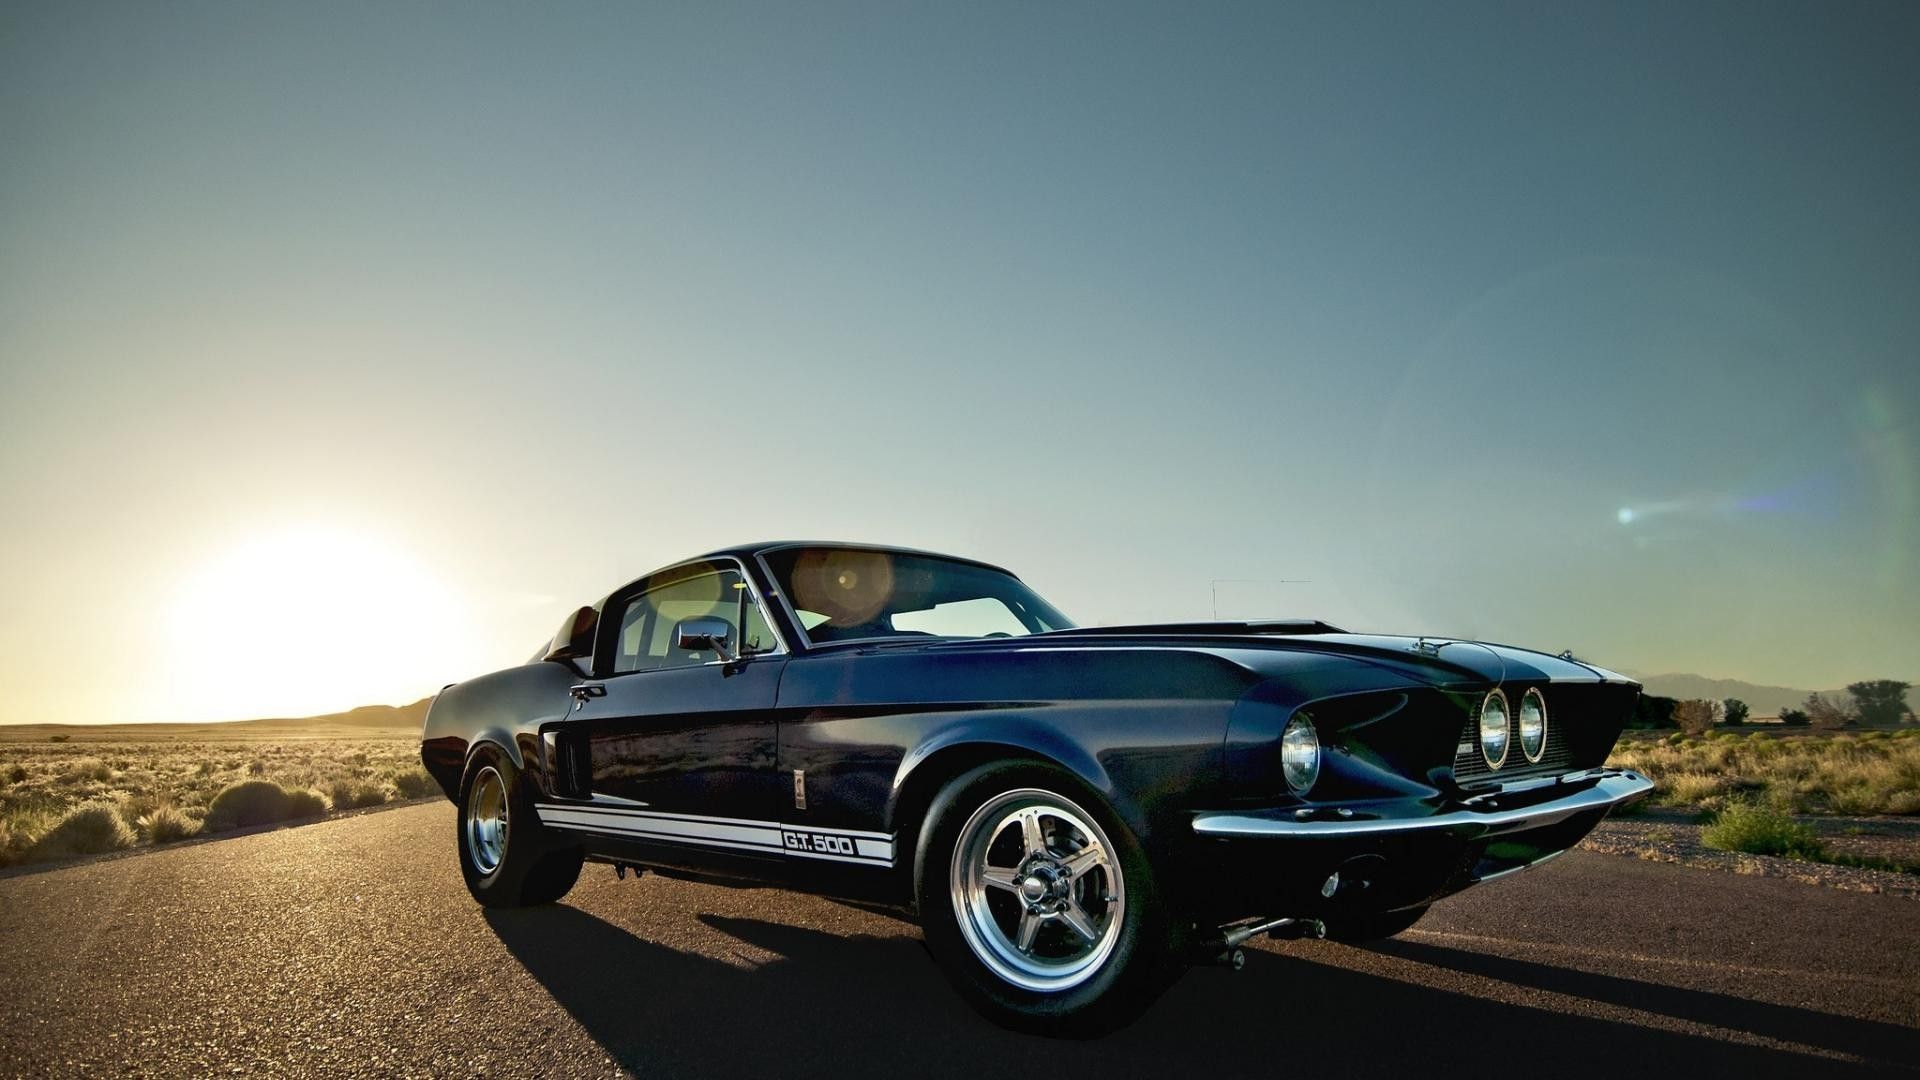 Mustang Classic Hd Wallpapers Free Download For Laptop Mustang Classic 1920x1080 Wallpaper Teahub Io